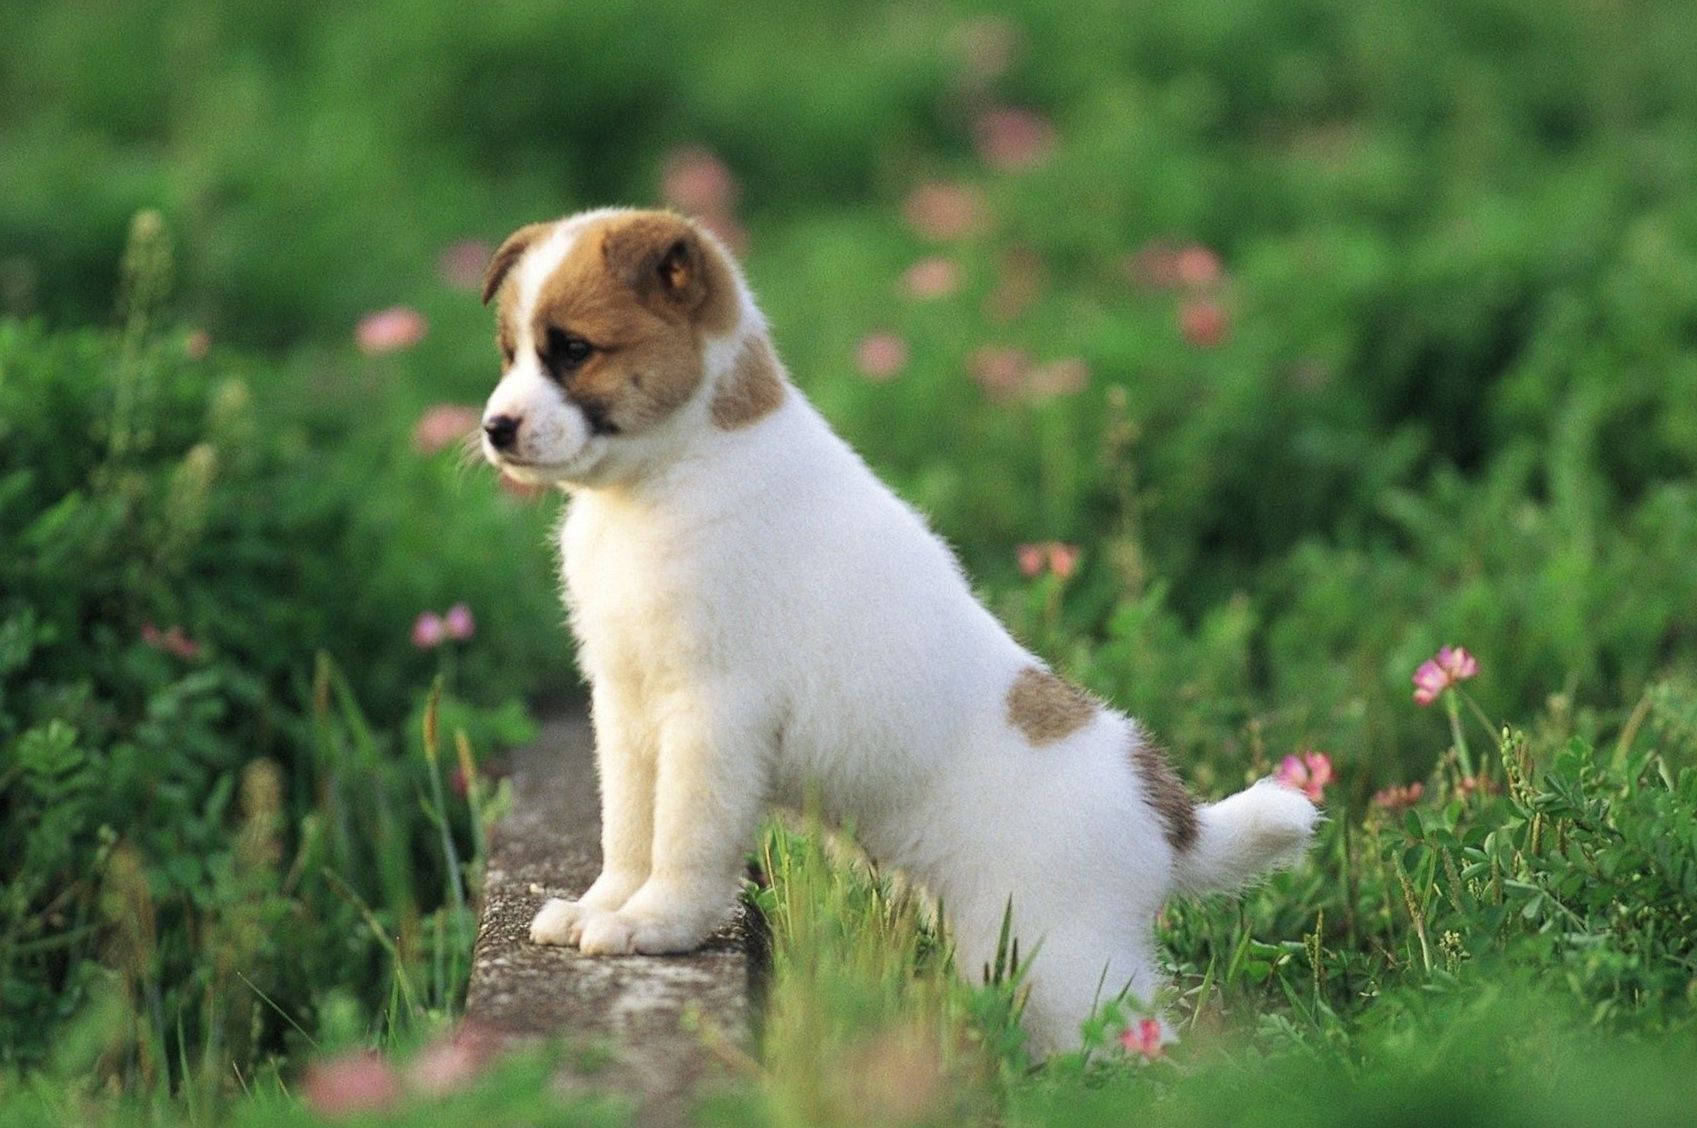 Puppy Dog On Grass With Pink Flowers